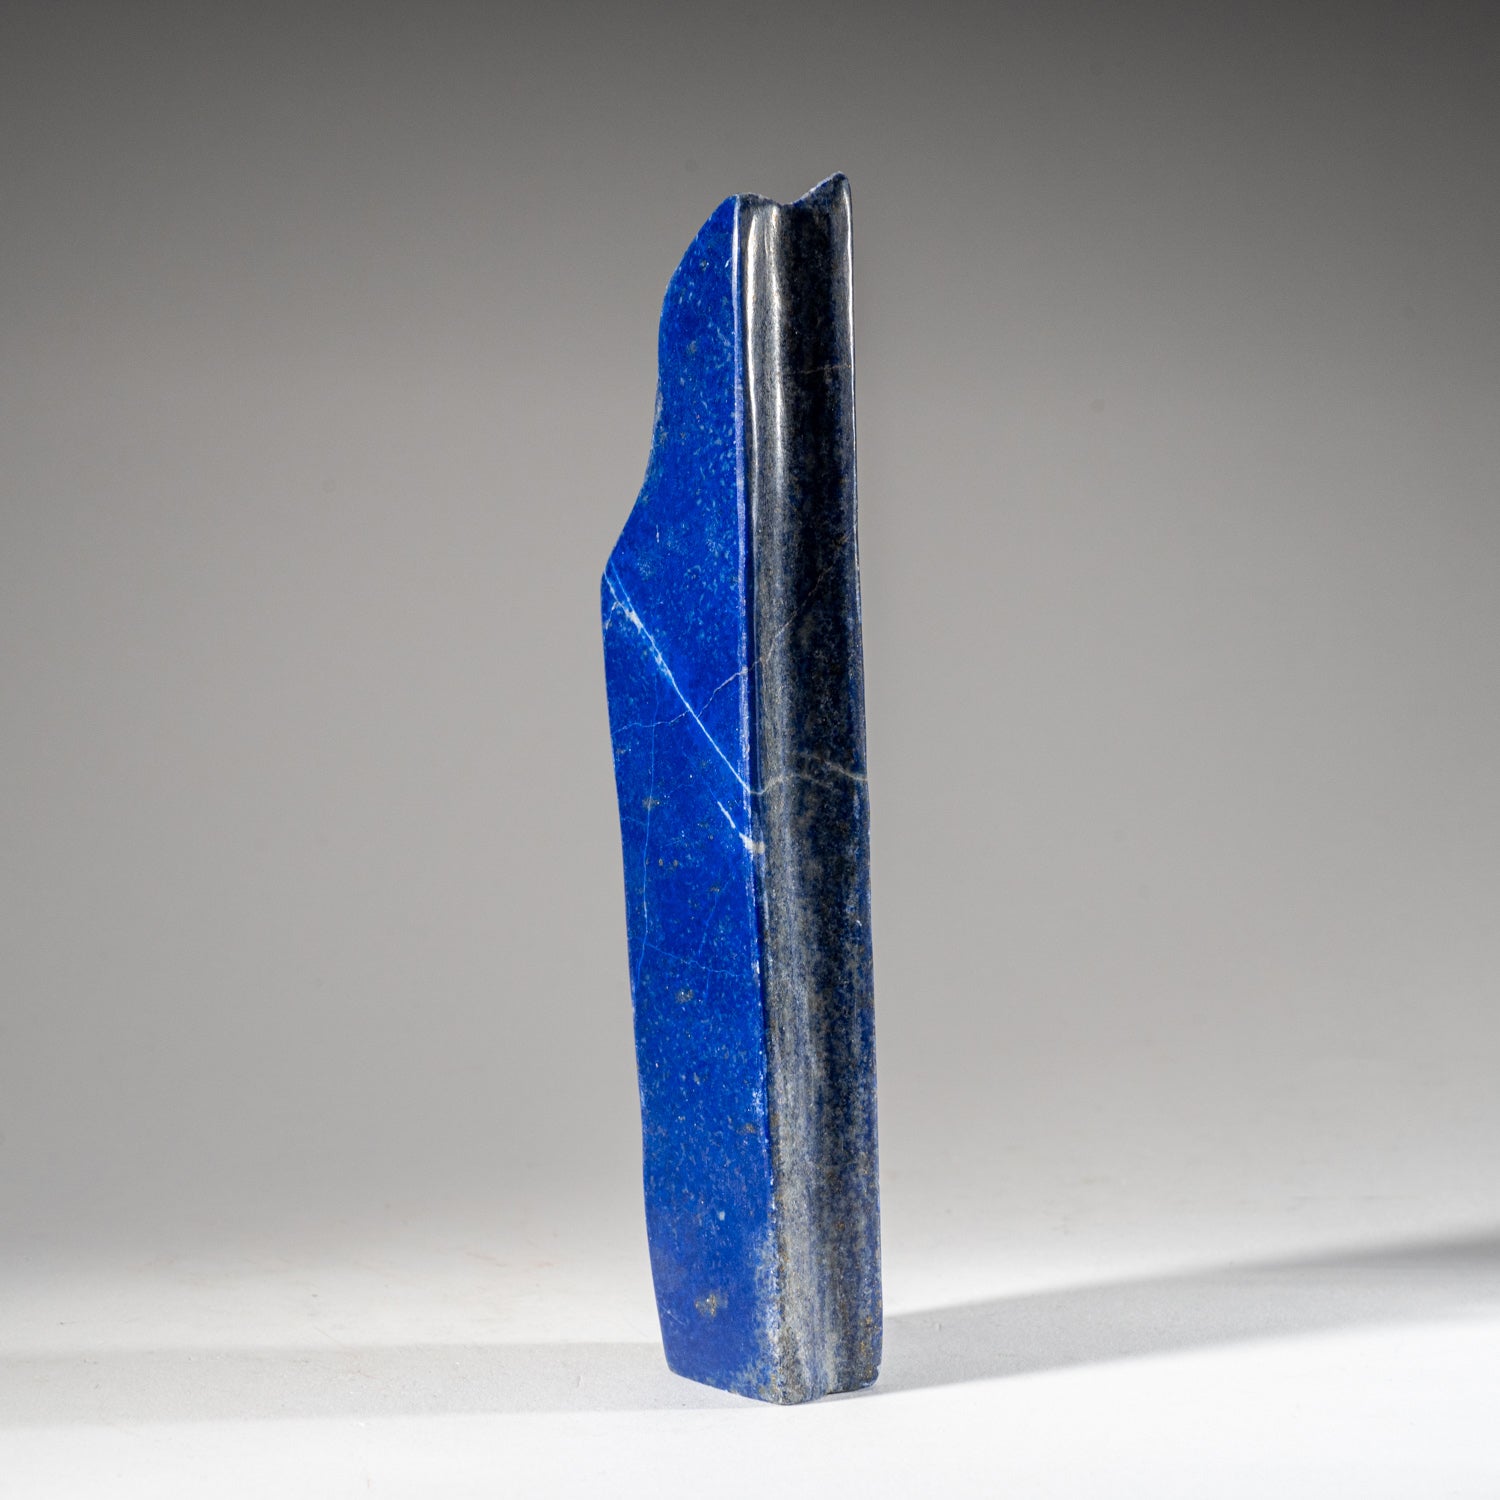 Polished Lapis Lazuli Freeform from Afghanistan (359 grams)